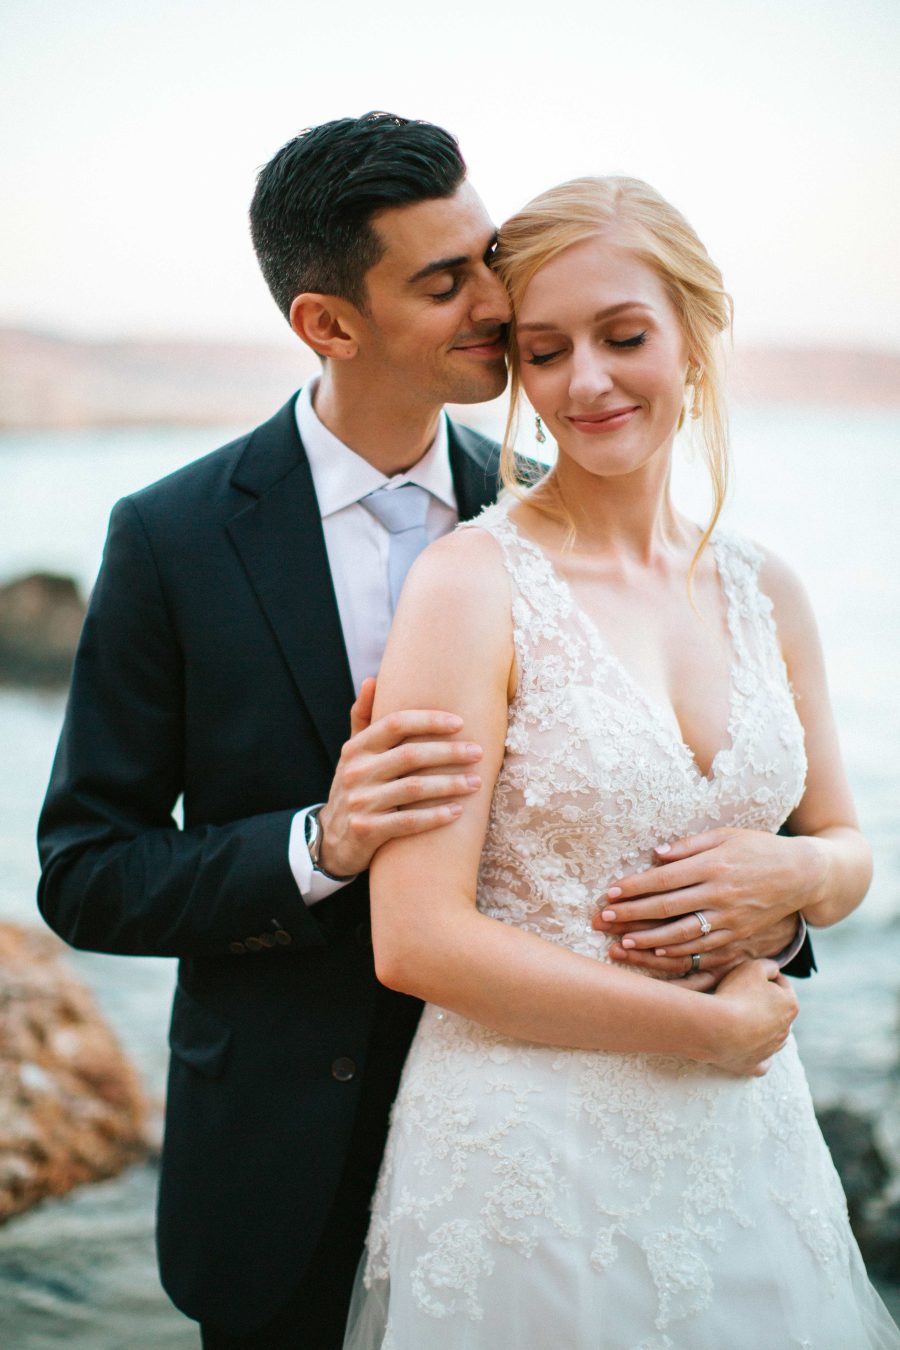 The couple went for some tender and romantic wedding portraits on the seashore